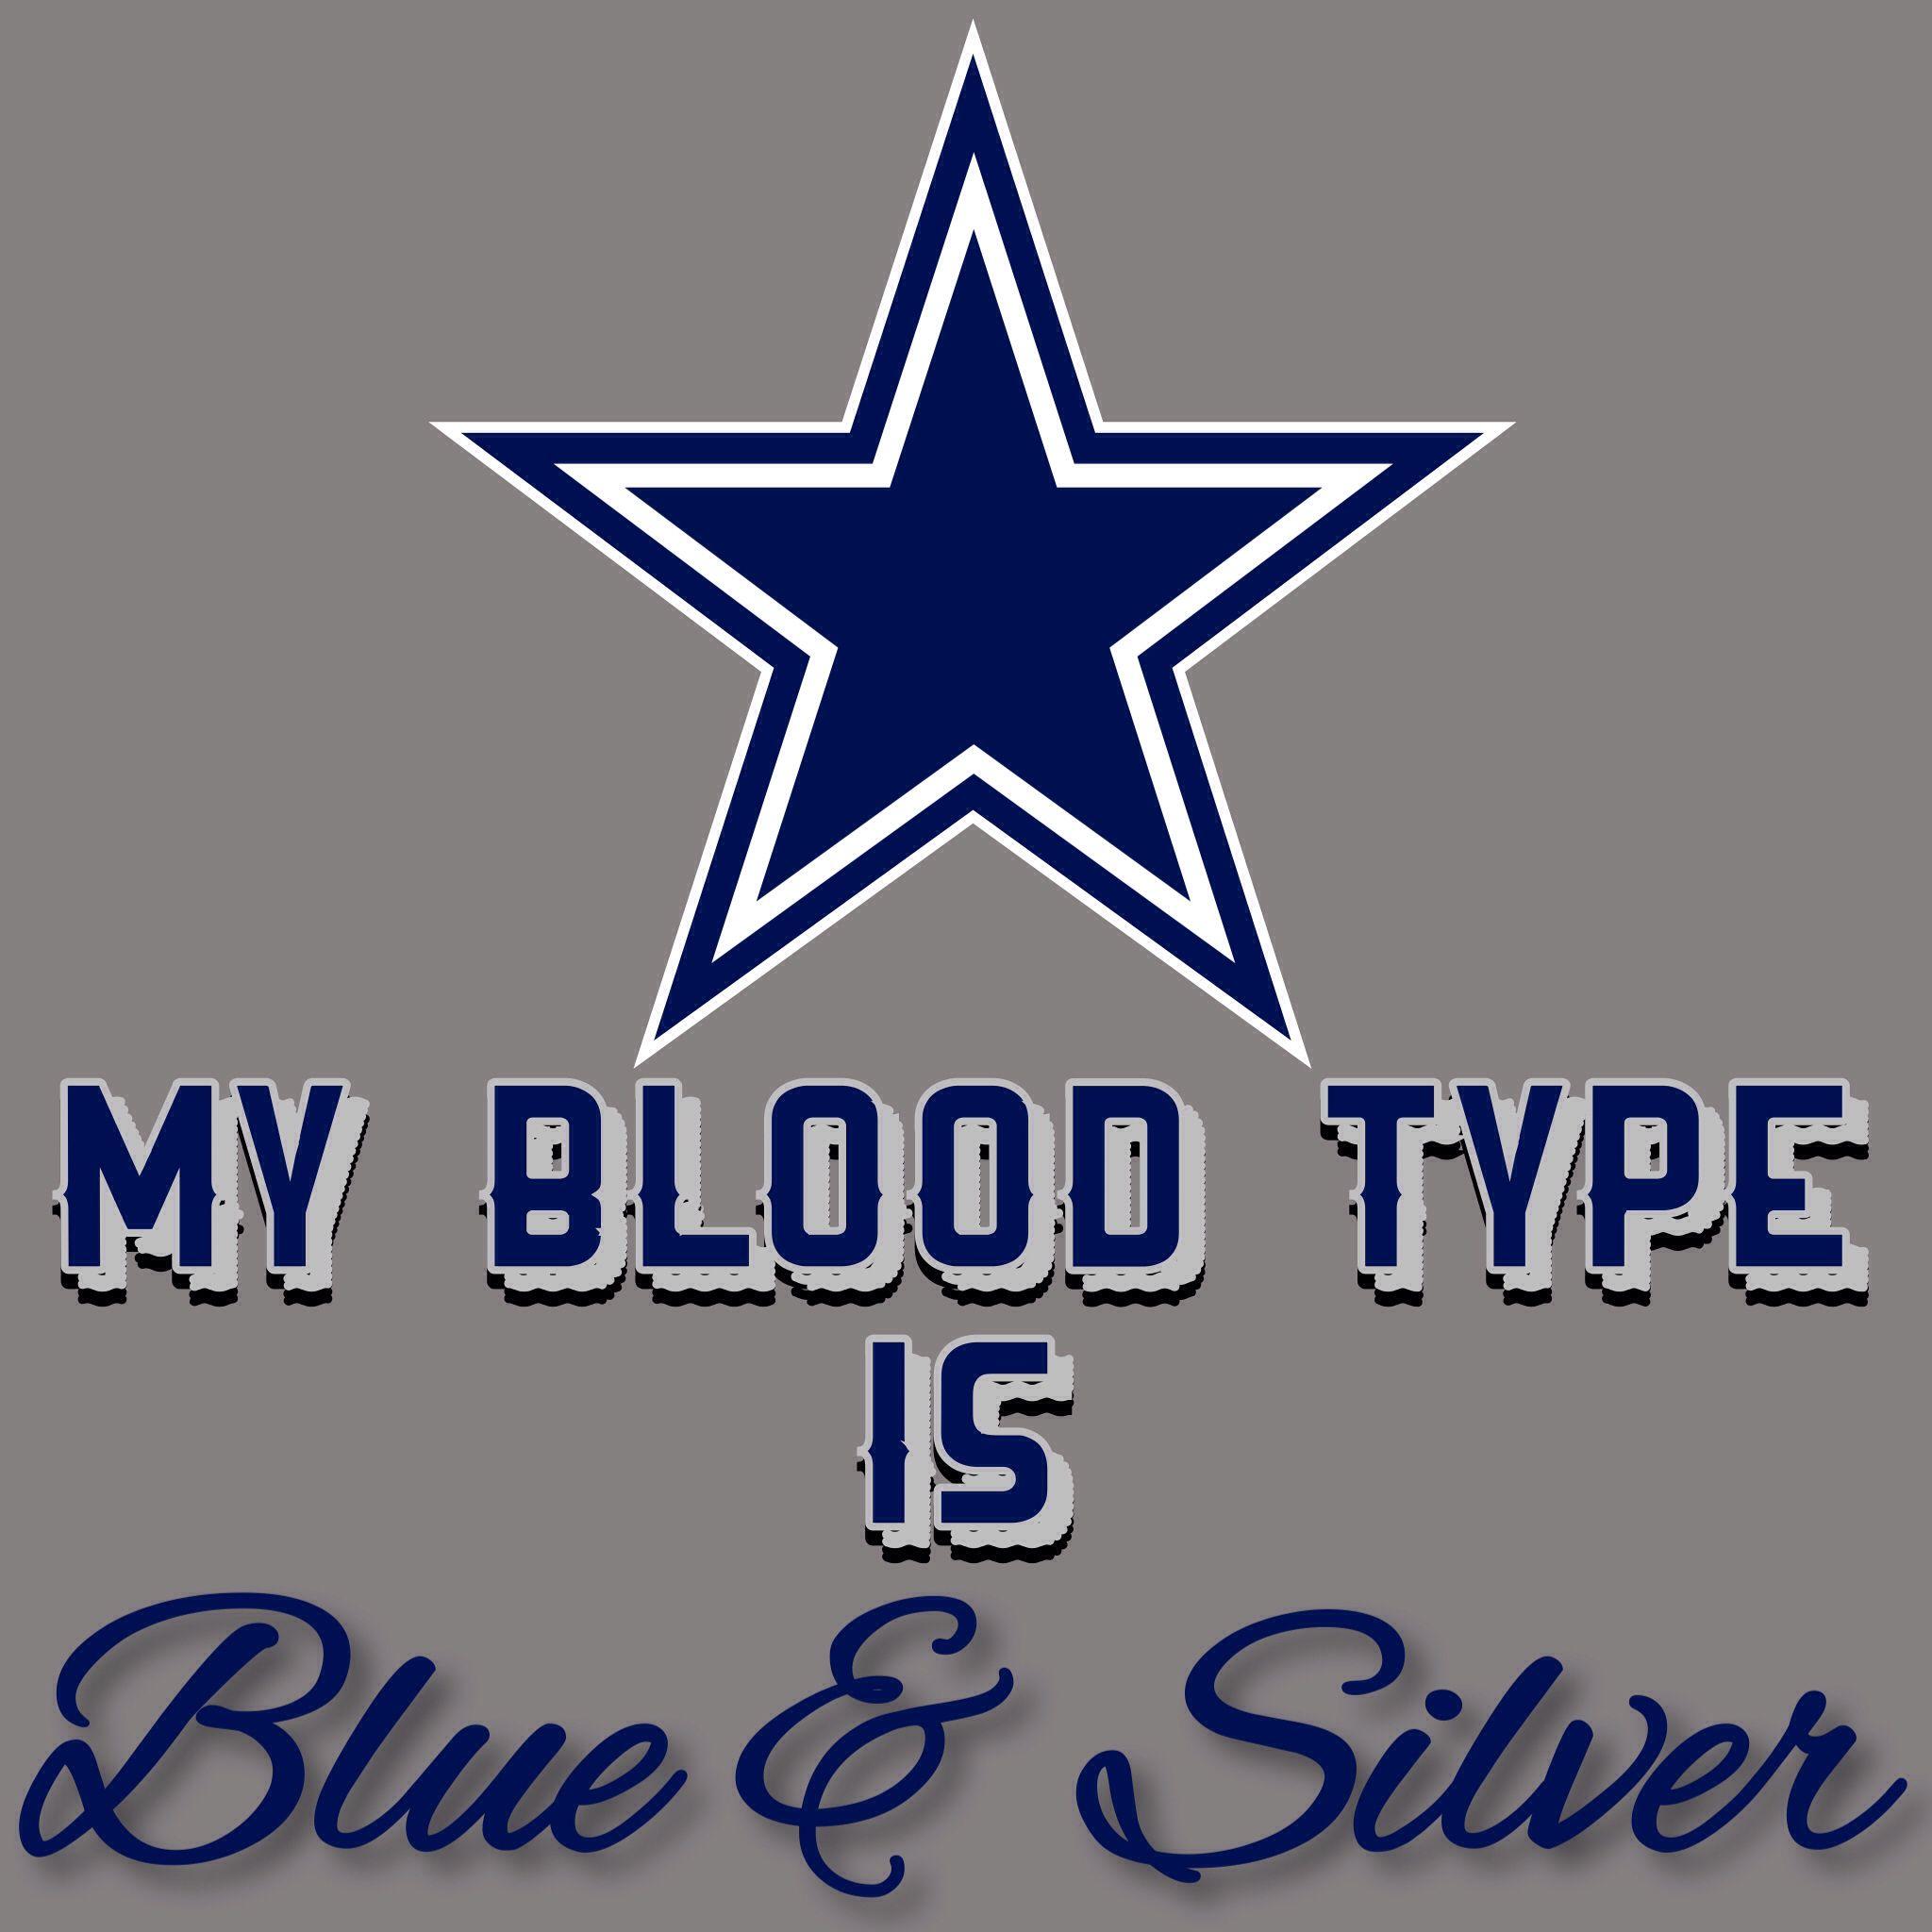 NFL Cowboys Logo - My Blood Type Is Blue & Silver Dallas Cowboys | Dallas Cowboys ...